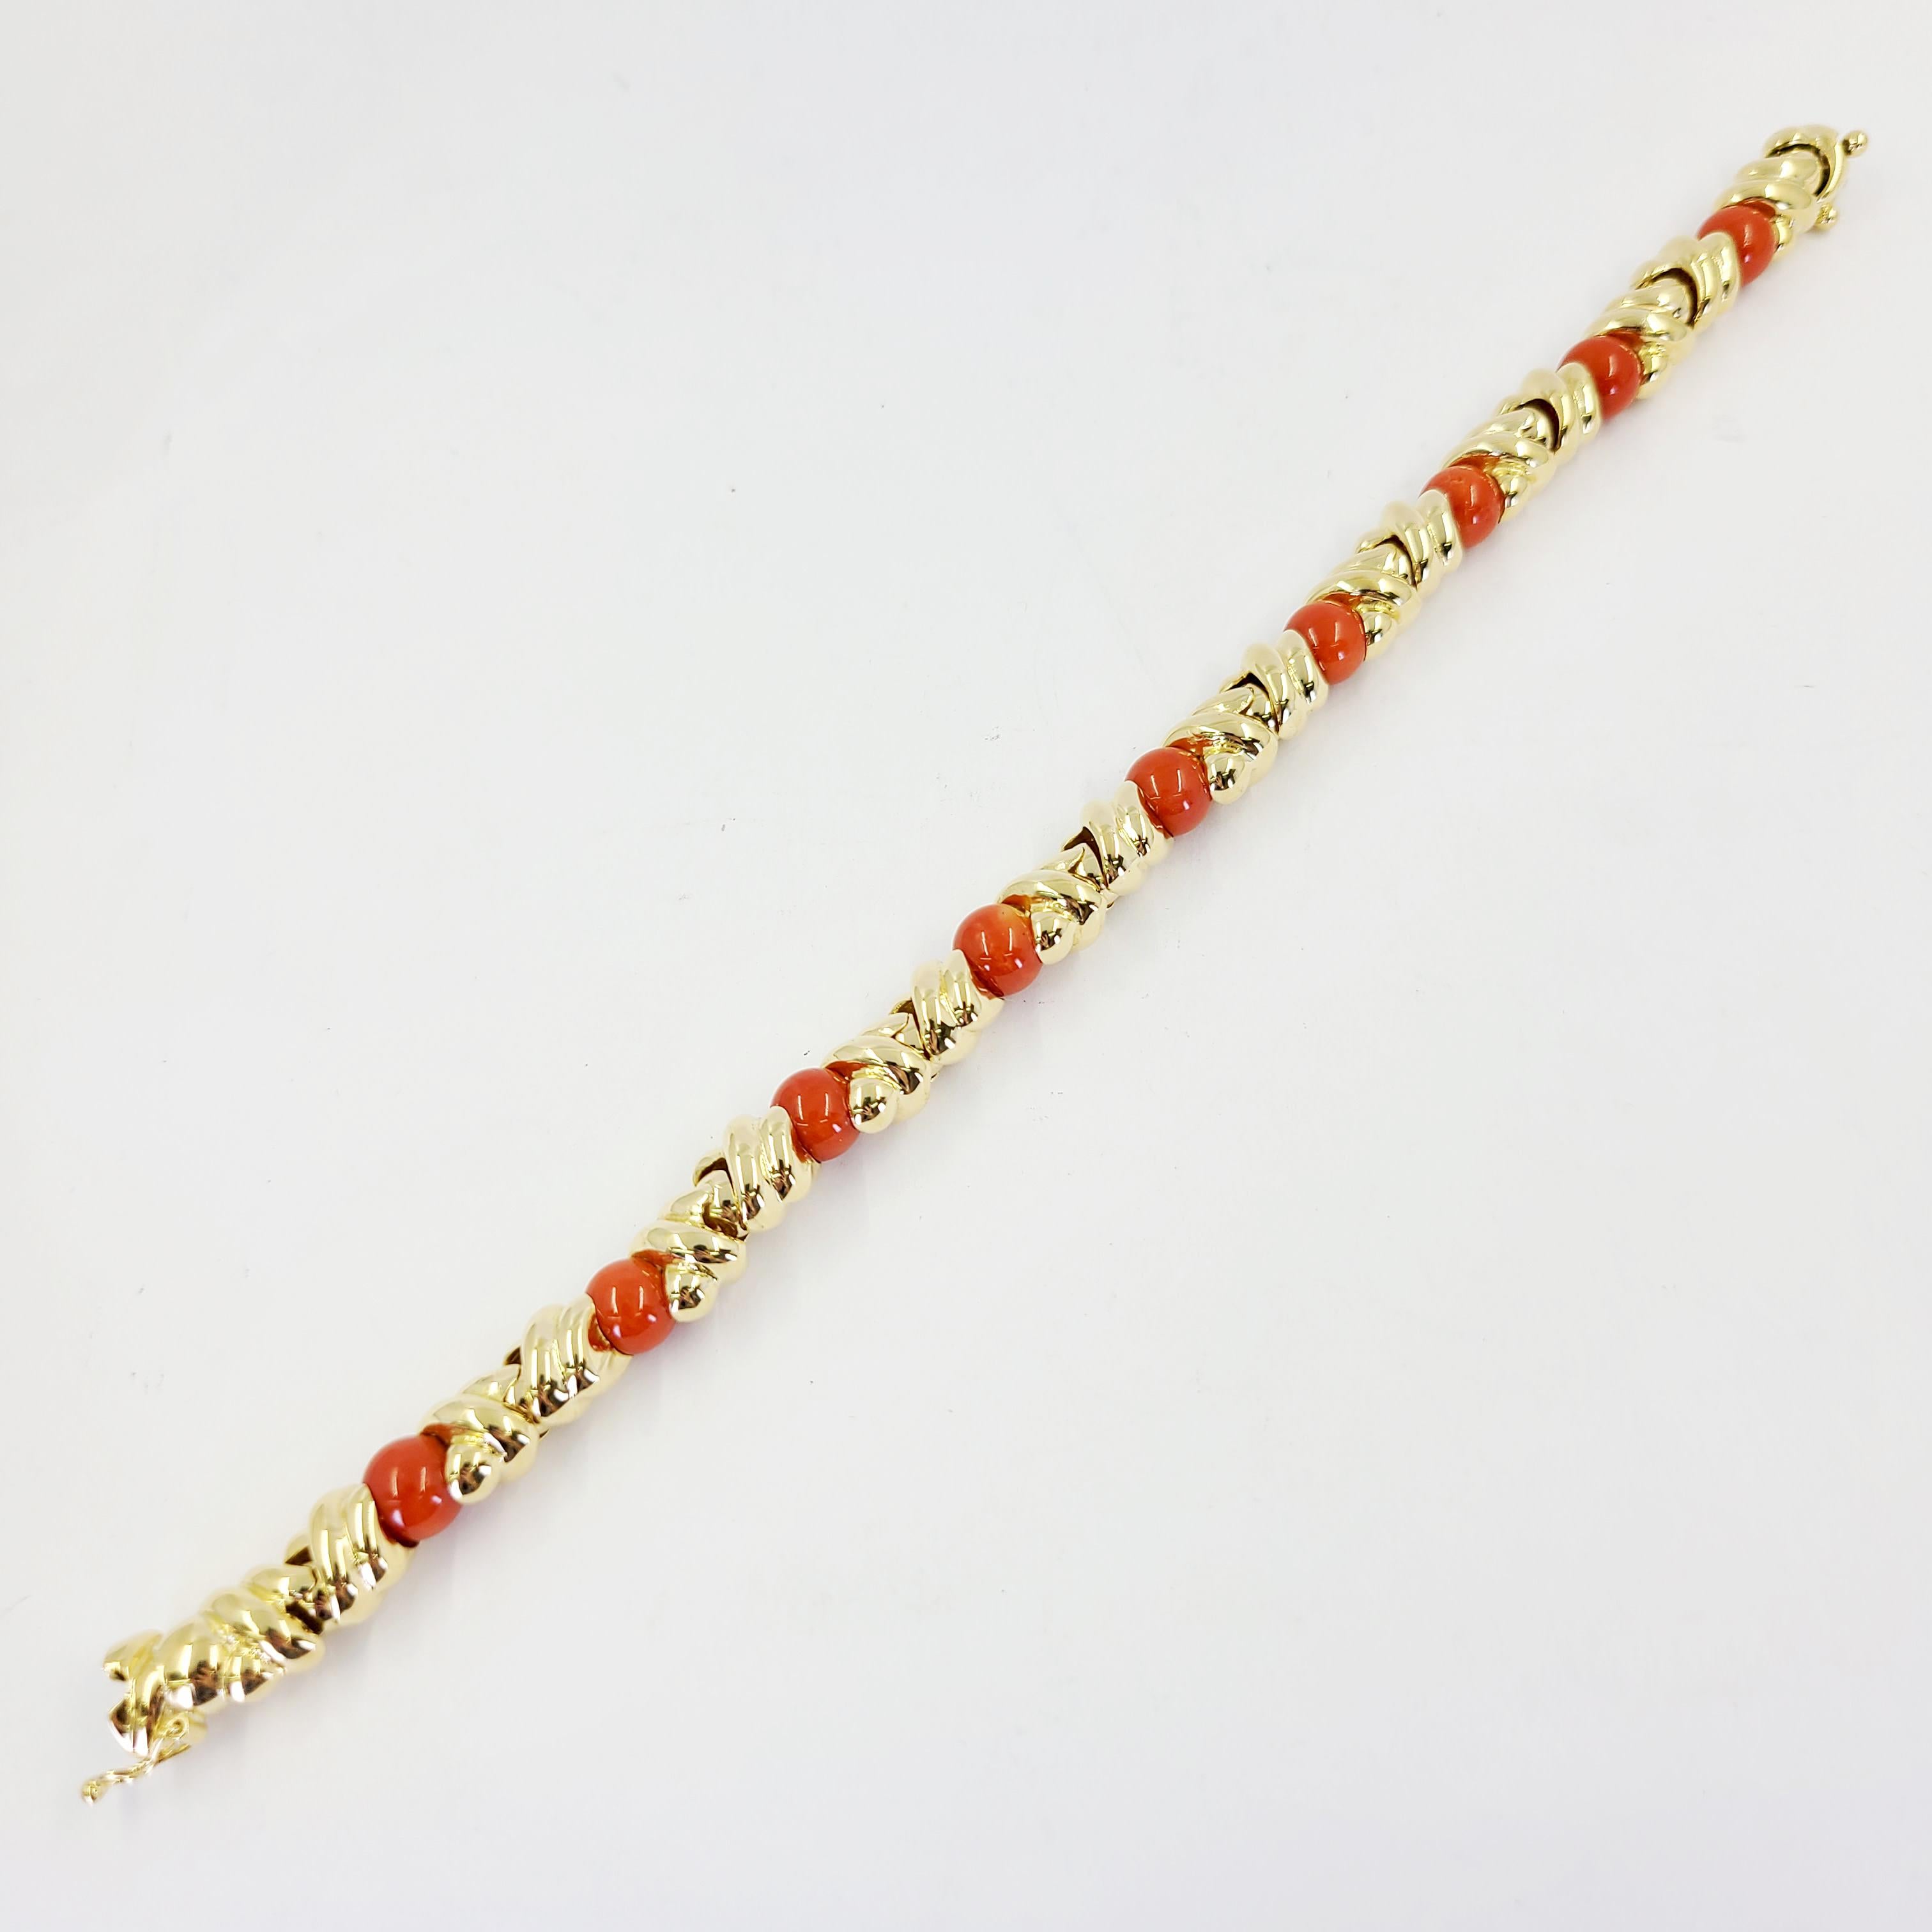 18 Karat Yellow Gold Link Bracelet Featuring 9 Round 8mm Coral Beads. 8.5 Inches Long With Hidden Box Clasp and Figure 8 Safety. Finished Weight Is 33.4 Grams. Made in Italy. Matching Necklace Also Available Separately.